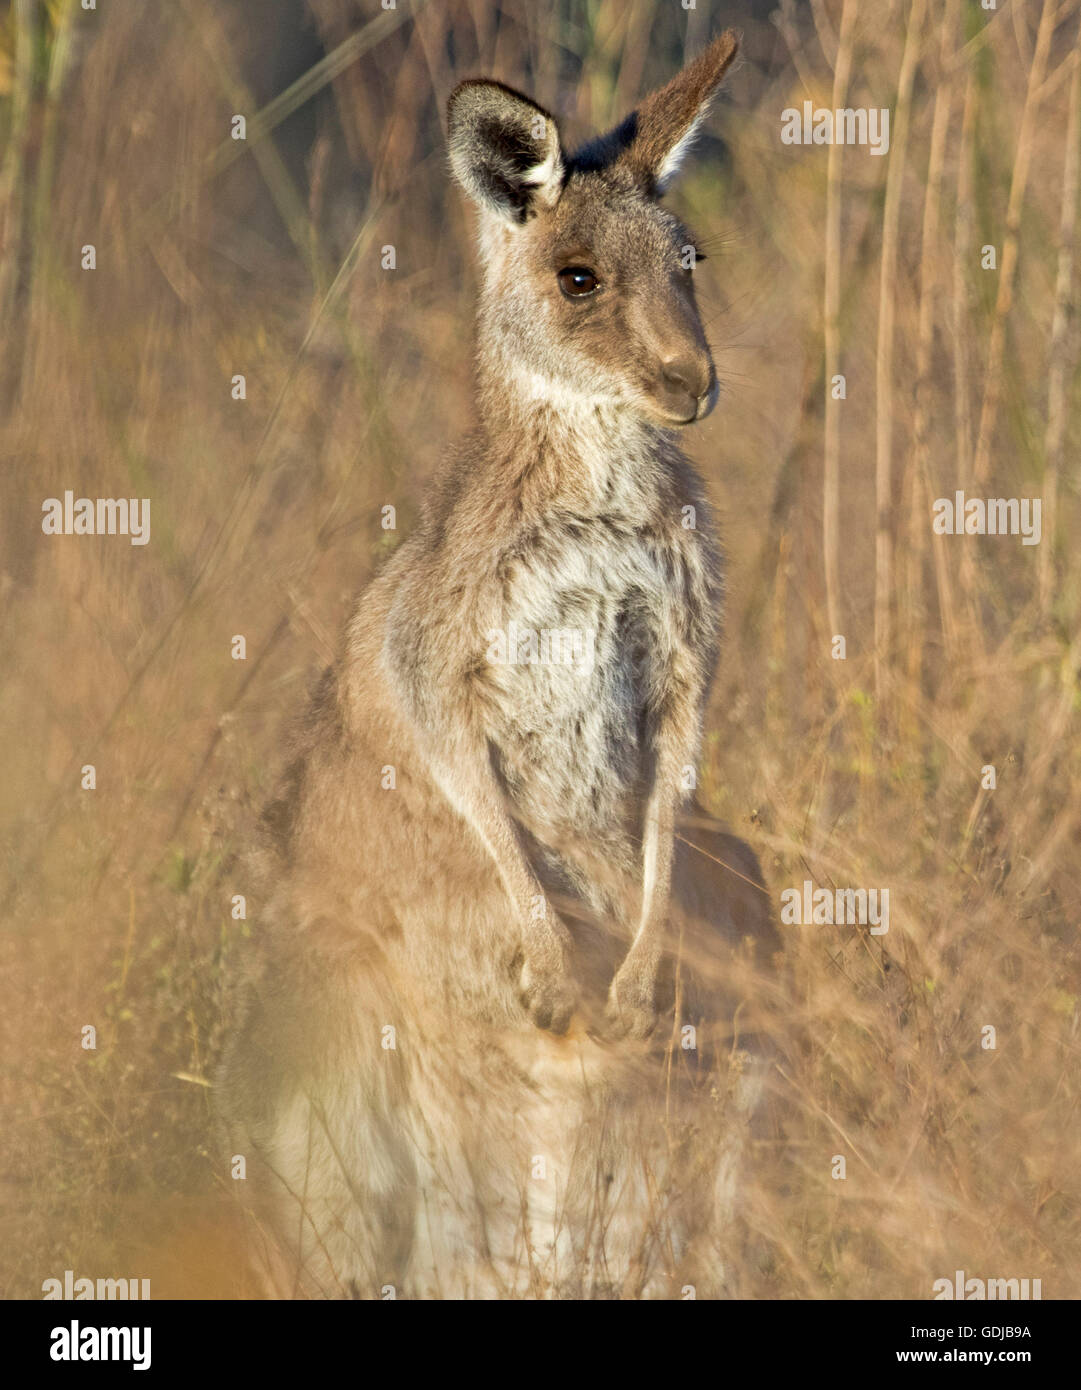 Young eastern grey kangaroo Macropus giganteus with gleaming eyes and alert expression among tall dry grasses in the wild in outback Australia Stock Photo